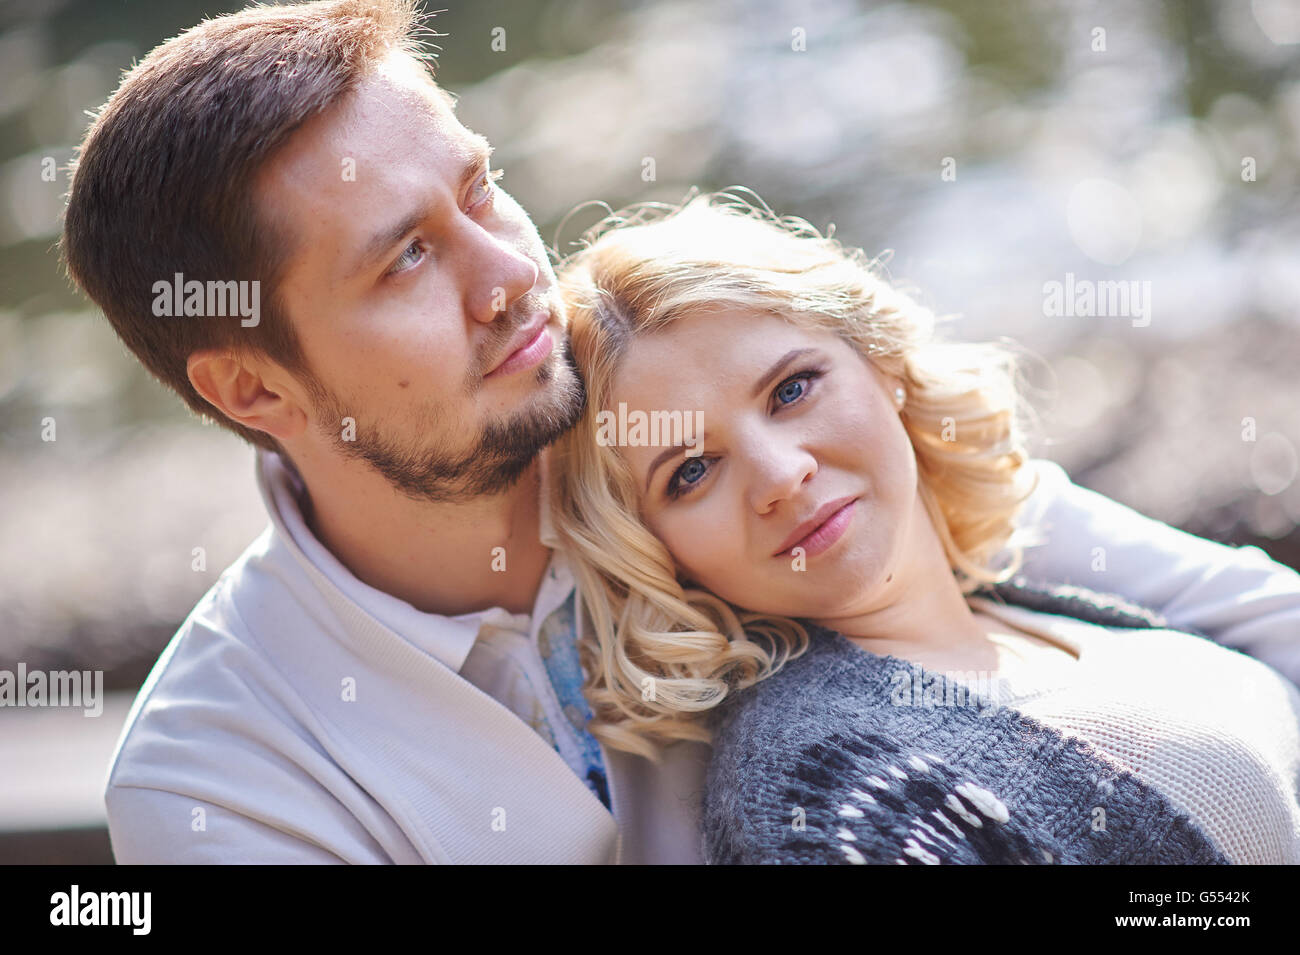 Close up portrait of happy smiling couple in love Stock Photo